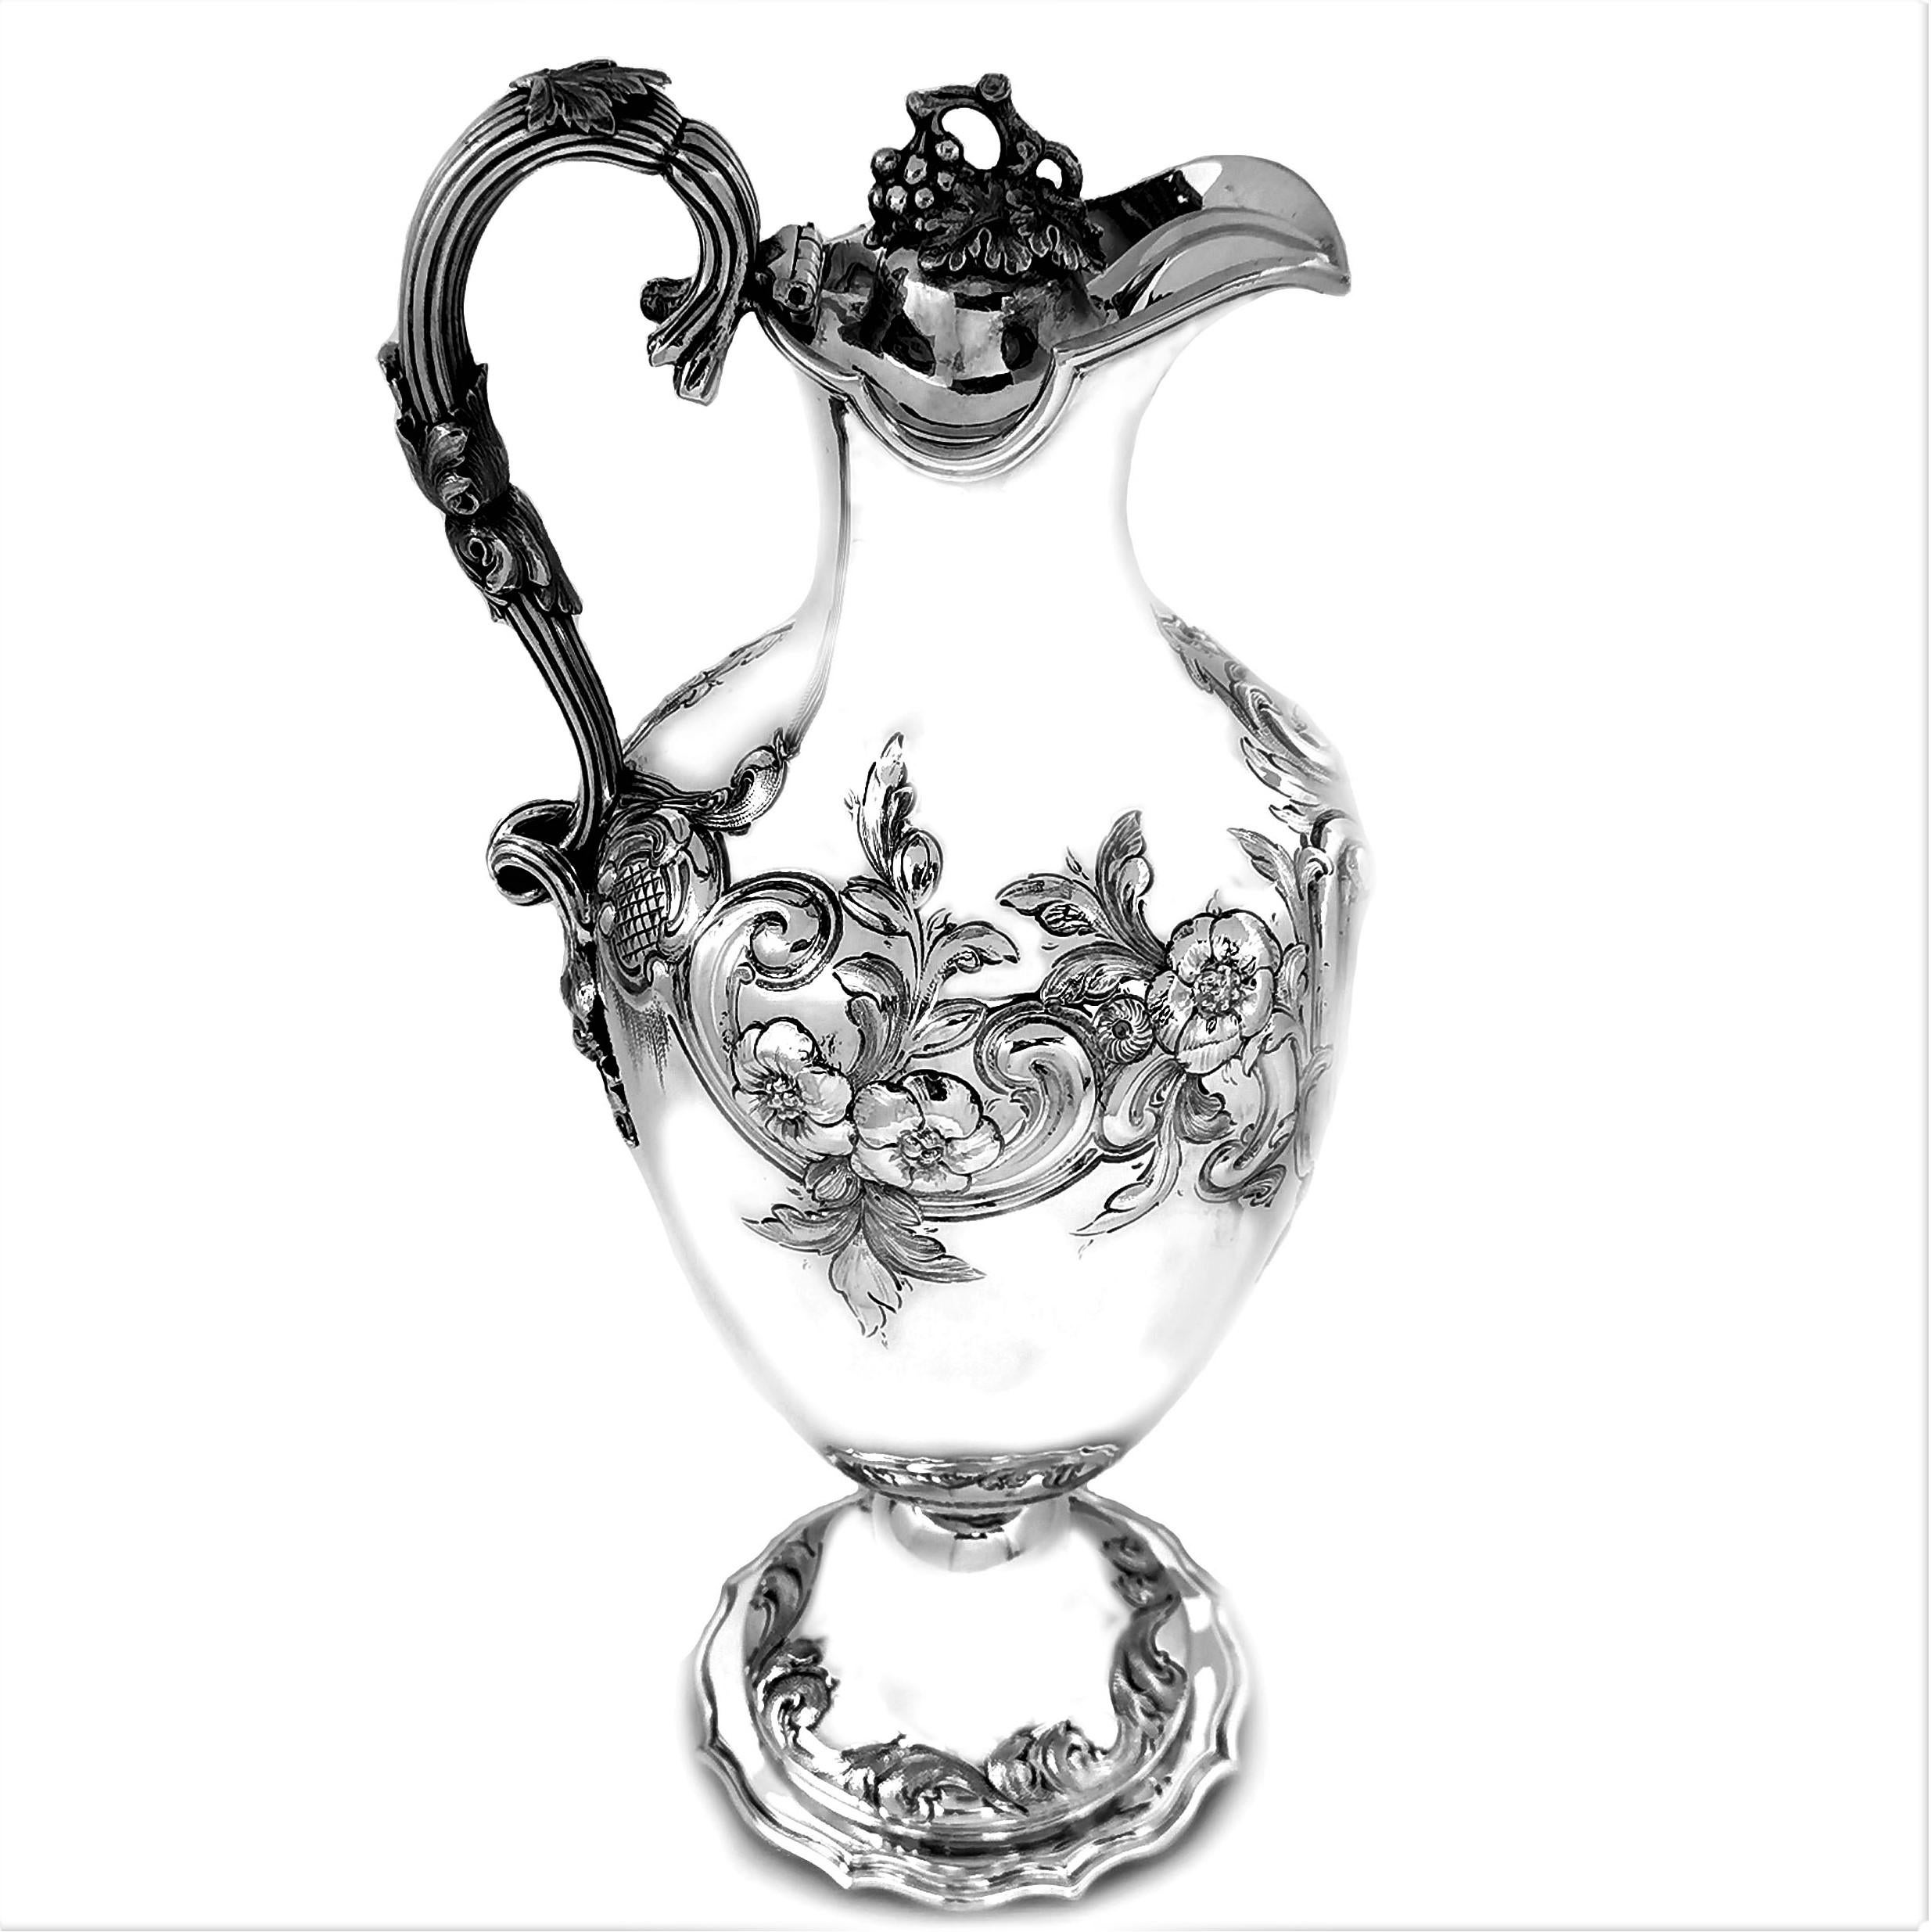 An elegant Antique Victorian solid Silver Wine / Claret Jug decorated with a beautiful chased floral and scroll design on either side of a scroll bordered cartouche. The Jug has a fine reeded handle embellished with a leaf and grape design in the